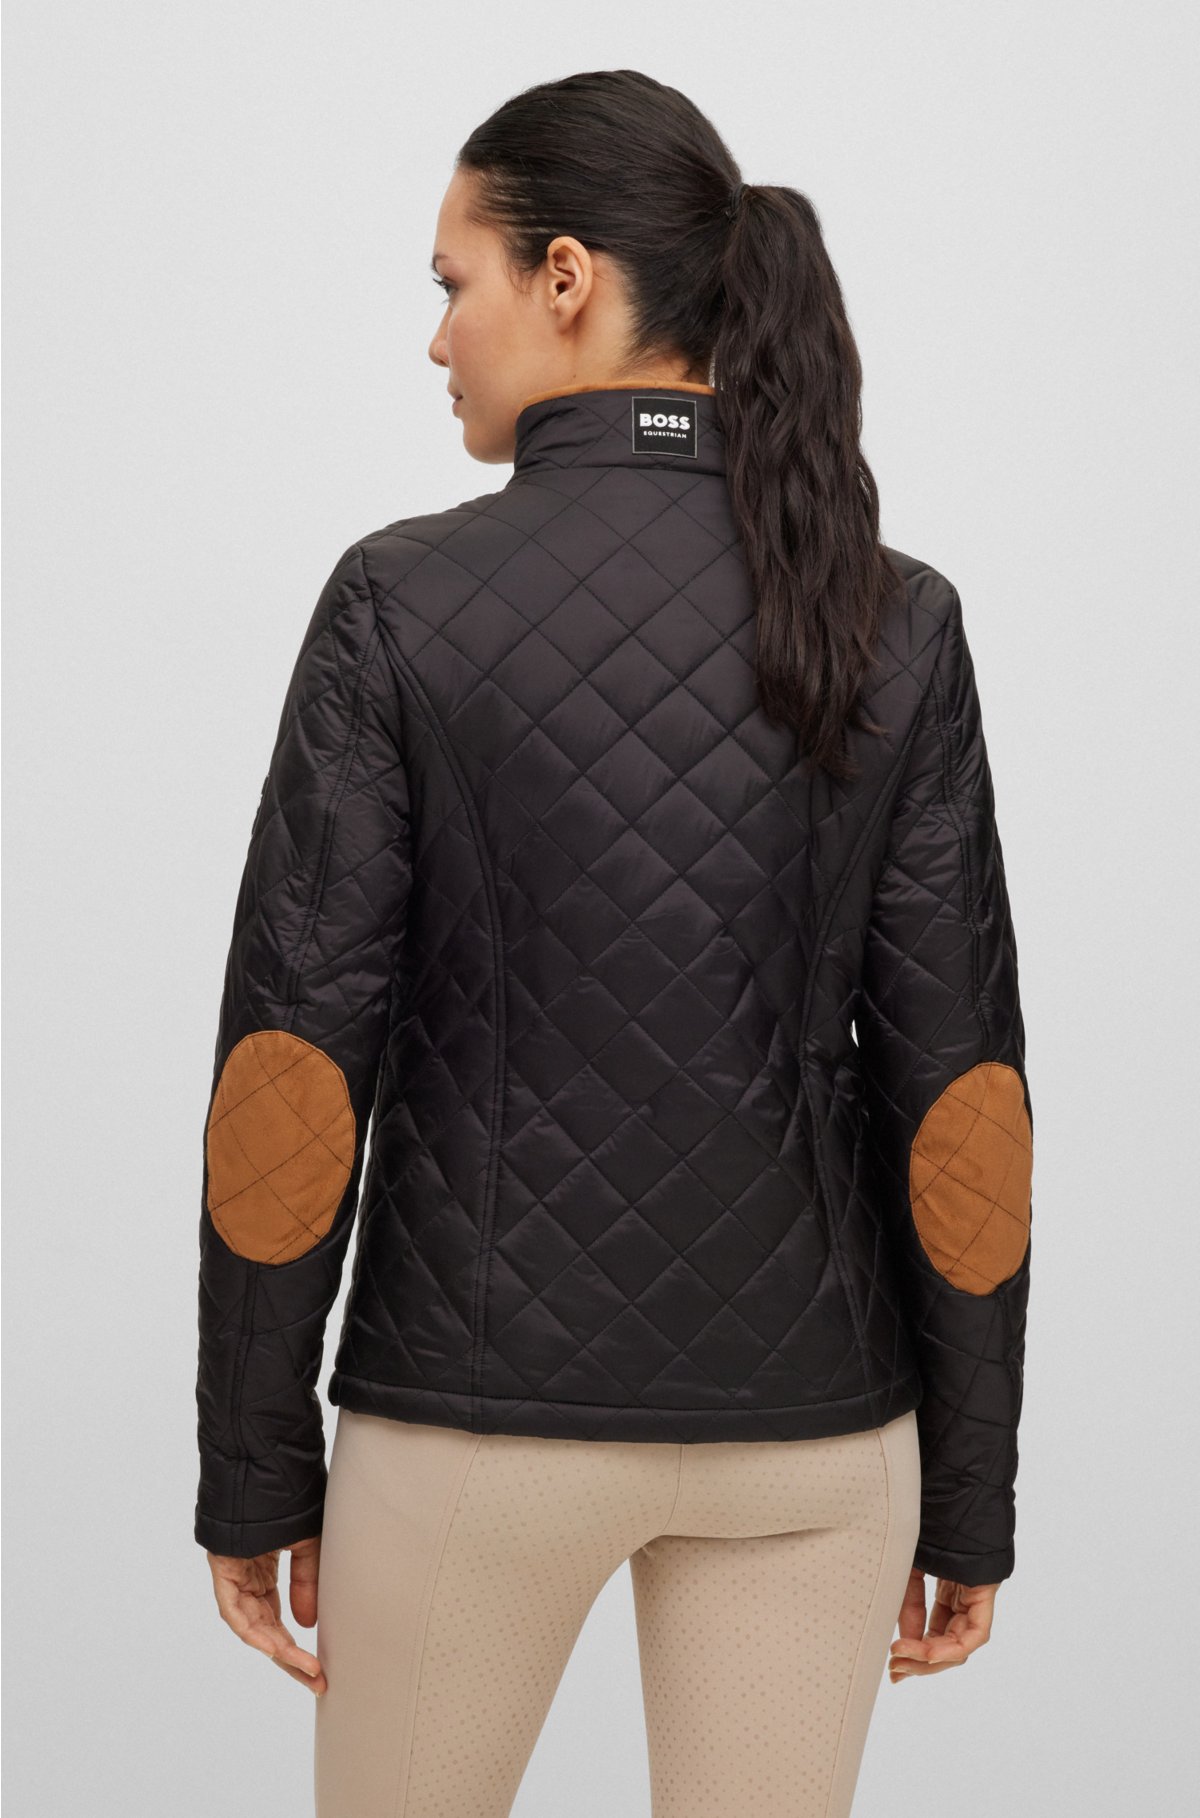 Equestrian padded jacket with signature detailing and logo, Black